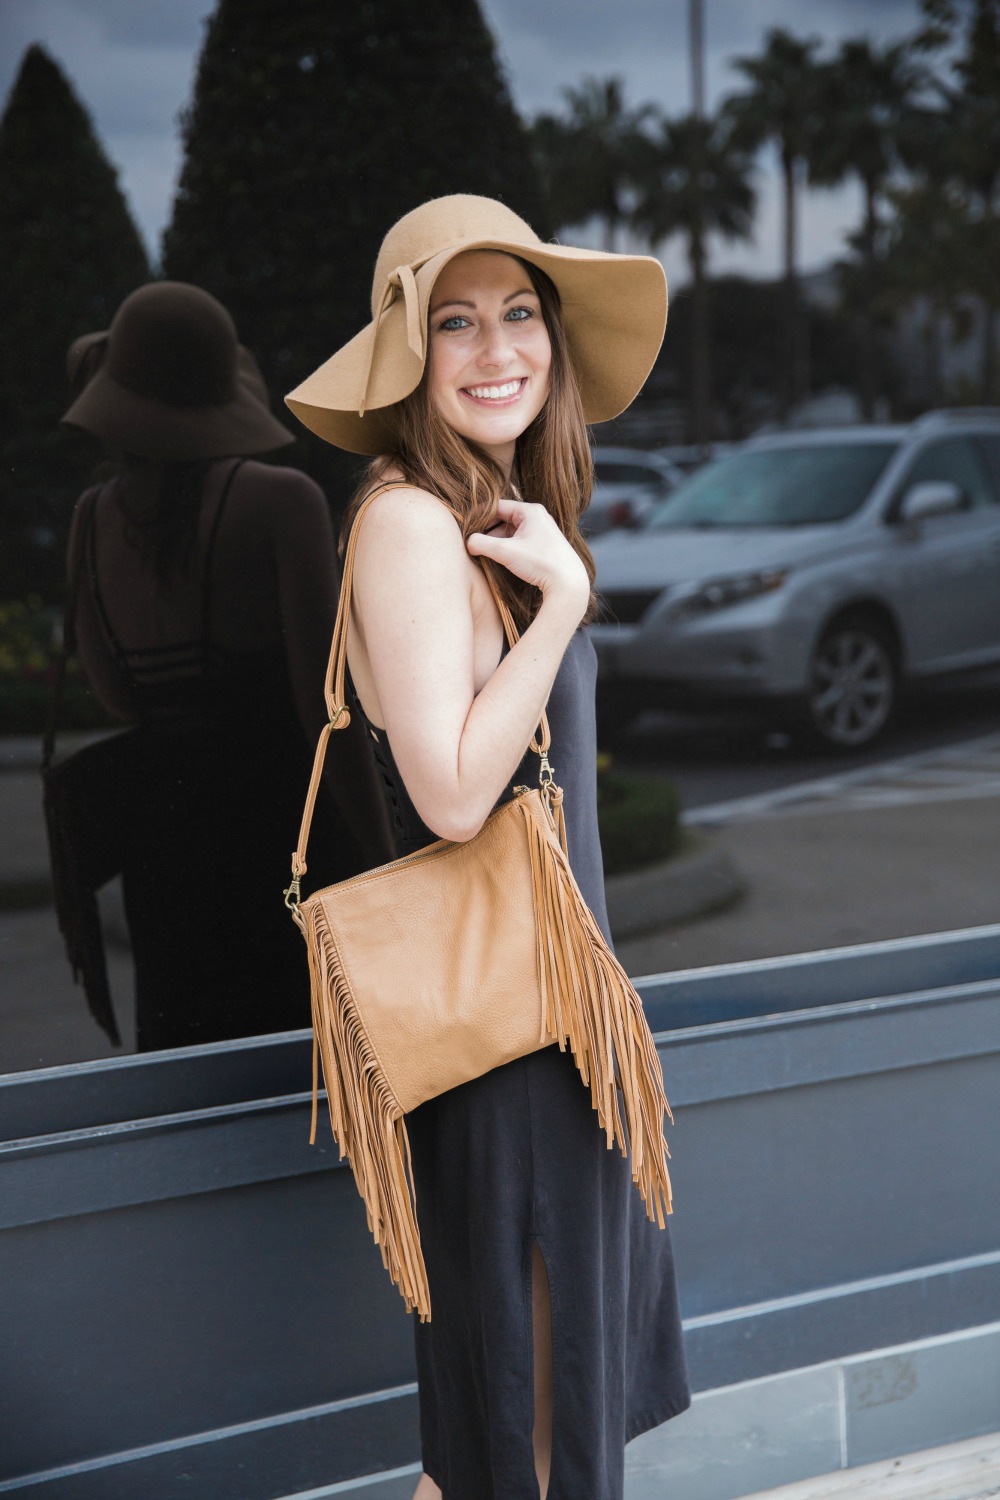 Black casual dress with fringe bag, perfect for a shopping look.